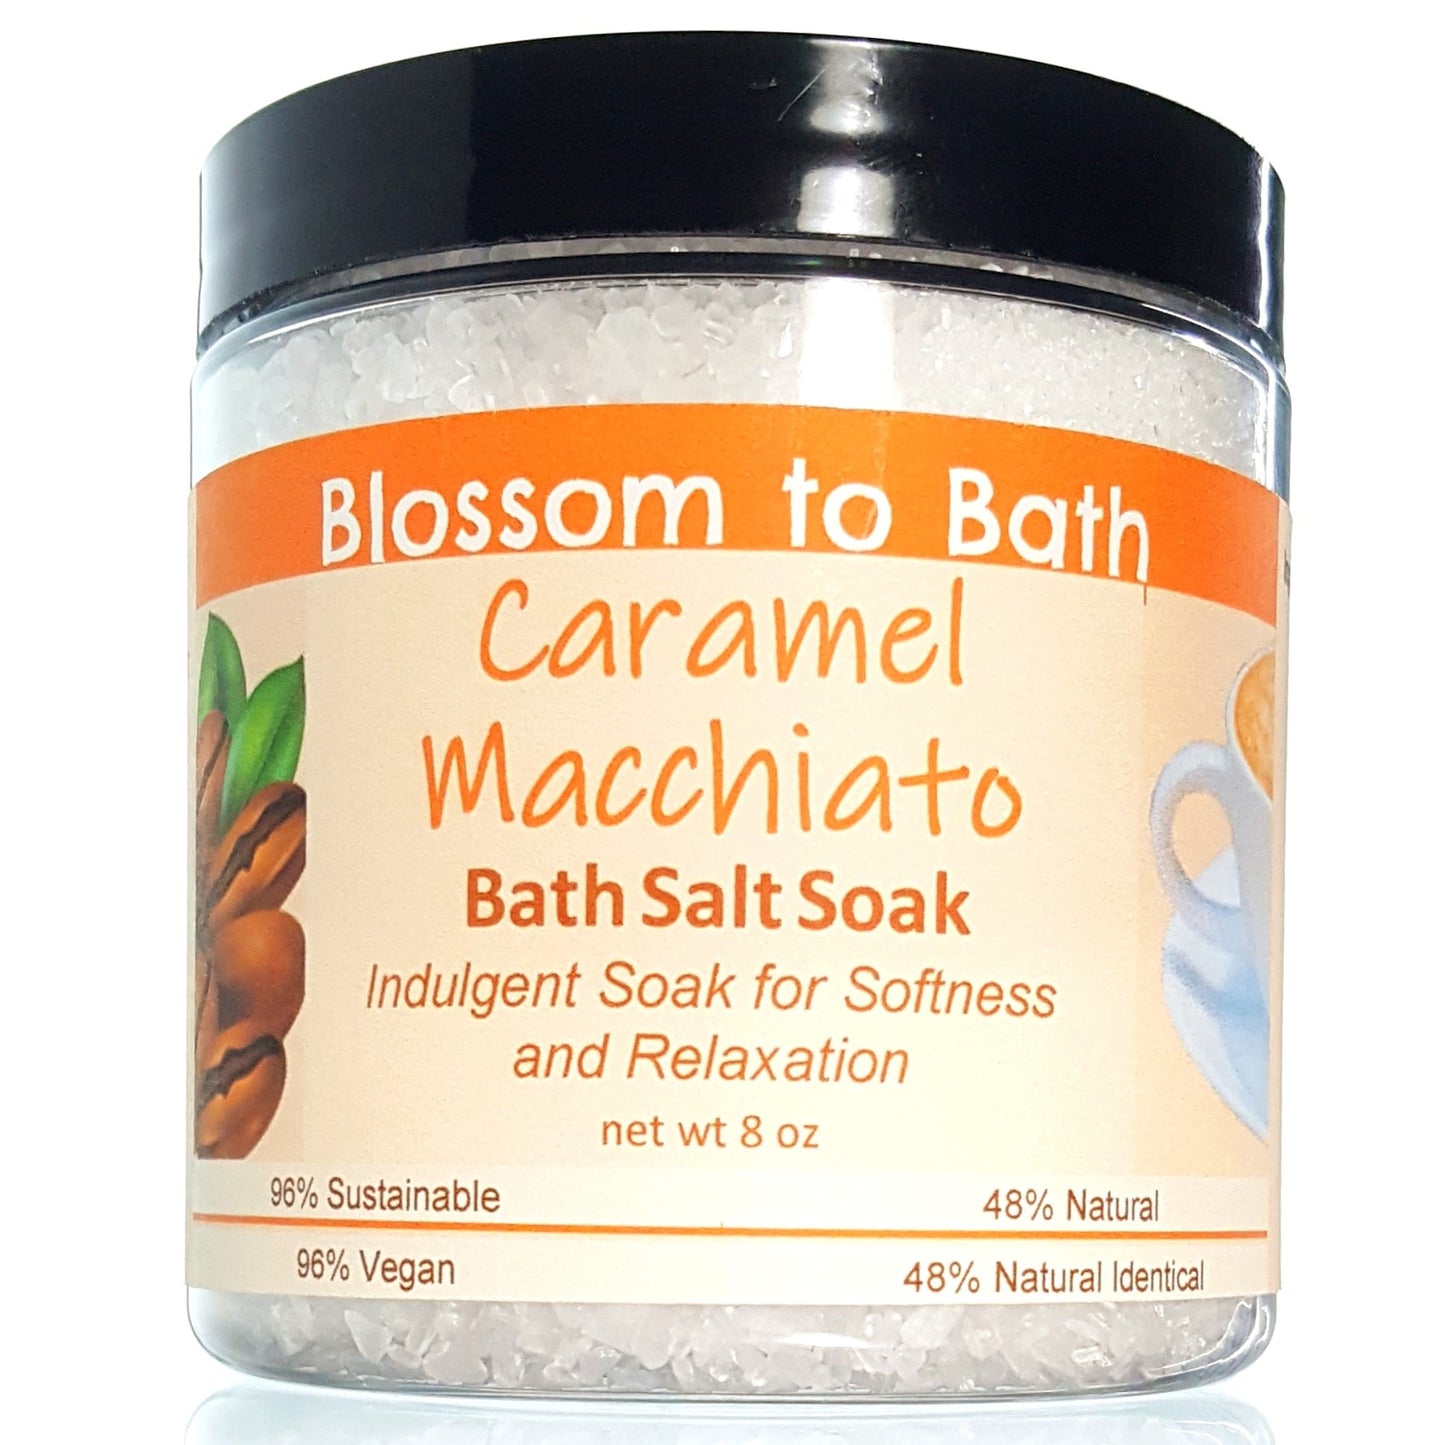 Buy Blossom to Bath Caramel Macchiato Bath Salt Soak from Flowersong Soap Studio.  Scented epsom salts for a luxurious soaking experience  Luscious vanilla and warm rich caramel - a gourmet coffee experience with sweet caramel in a bed of vibrant coffee;